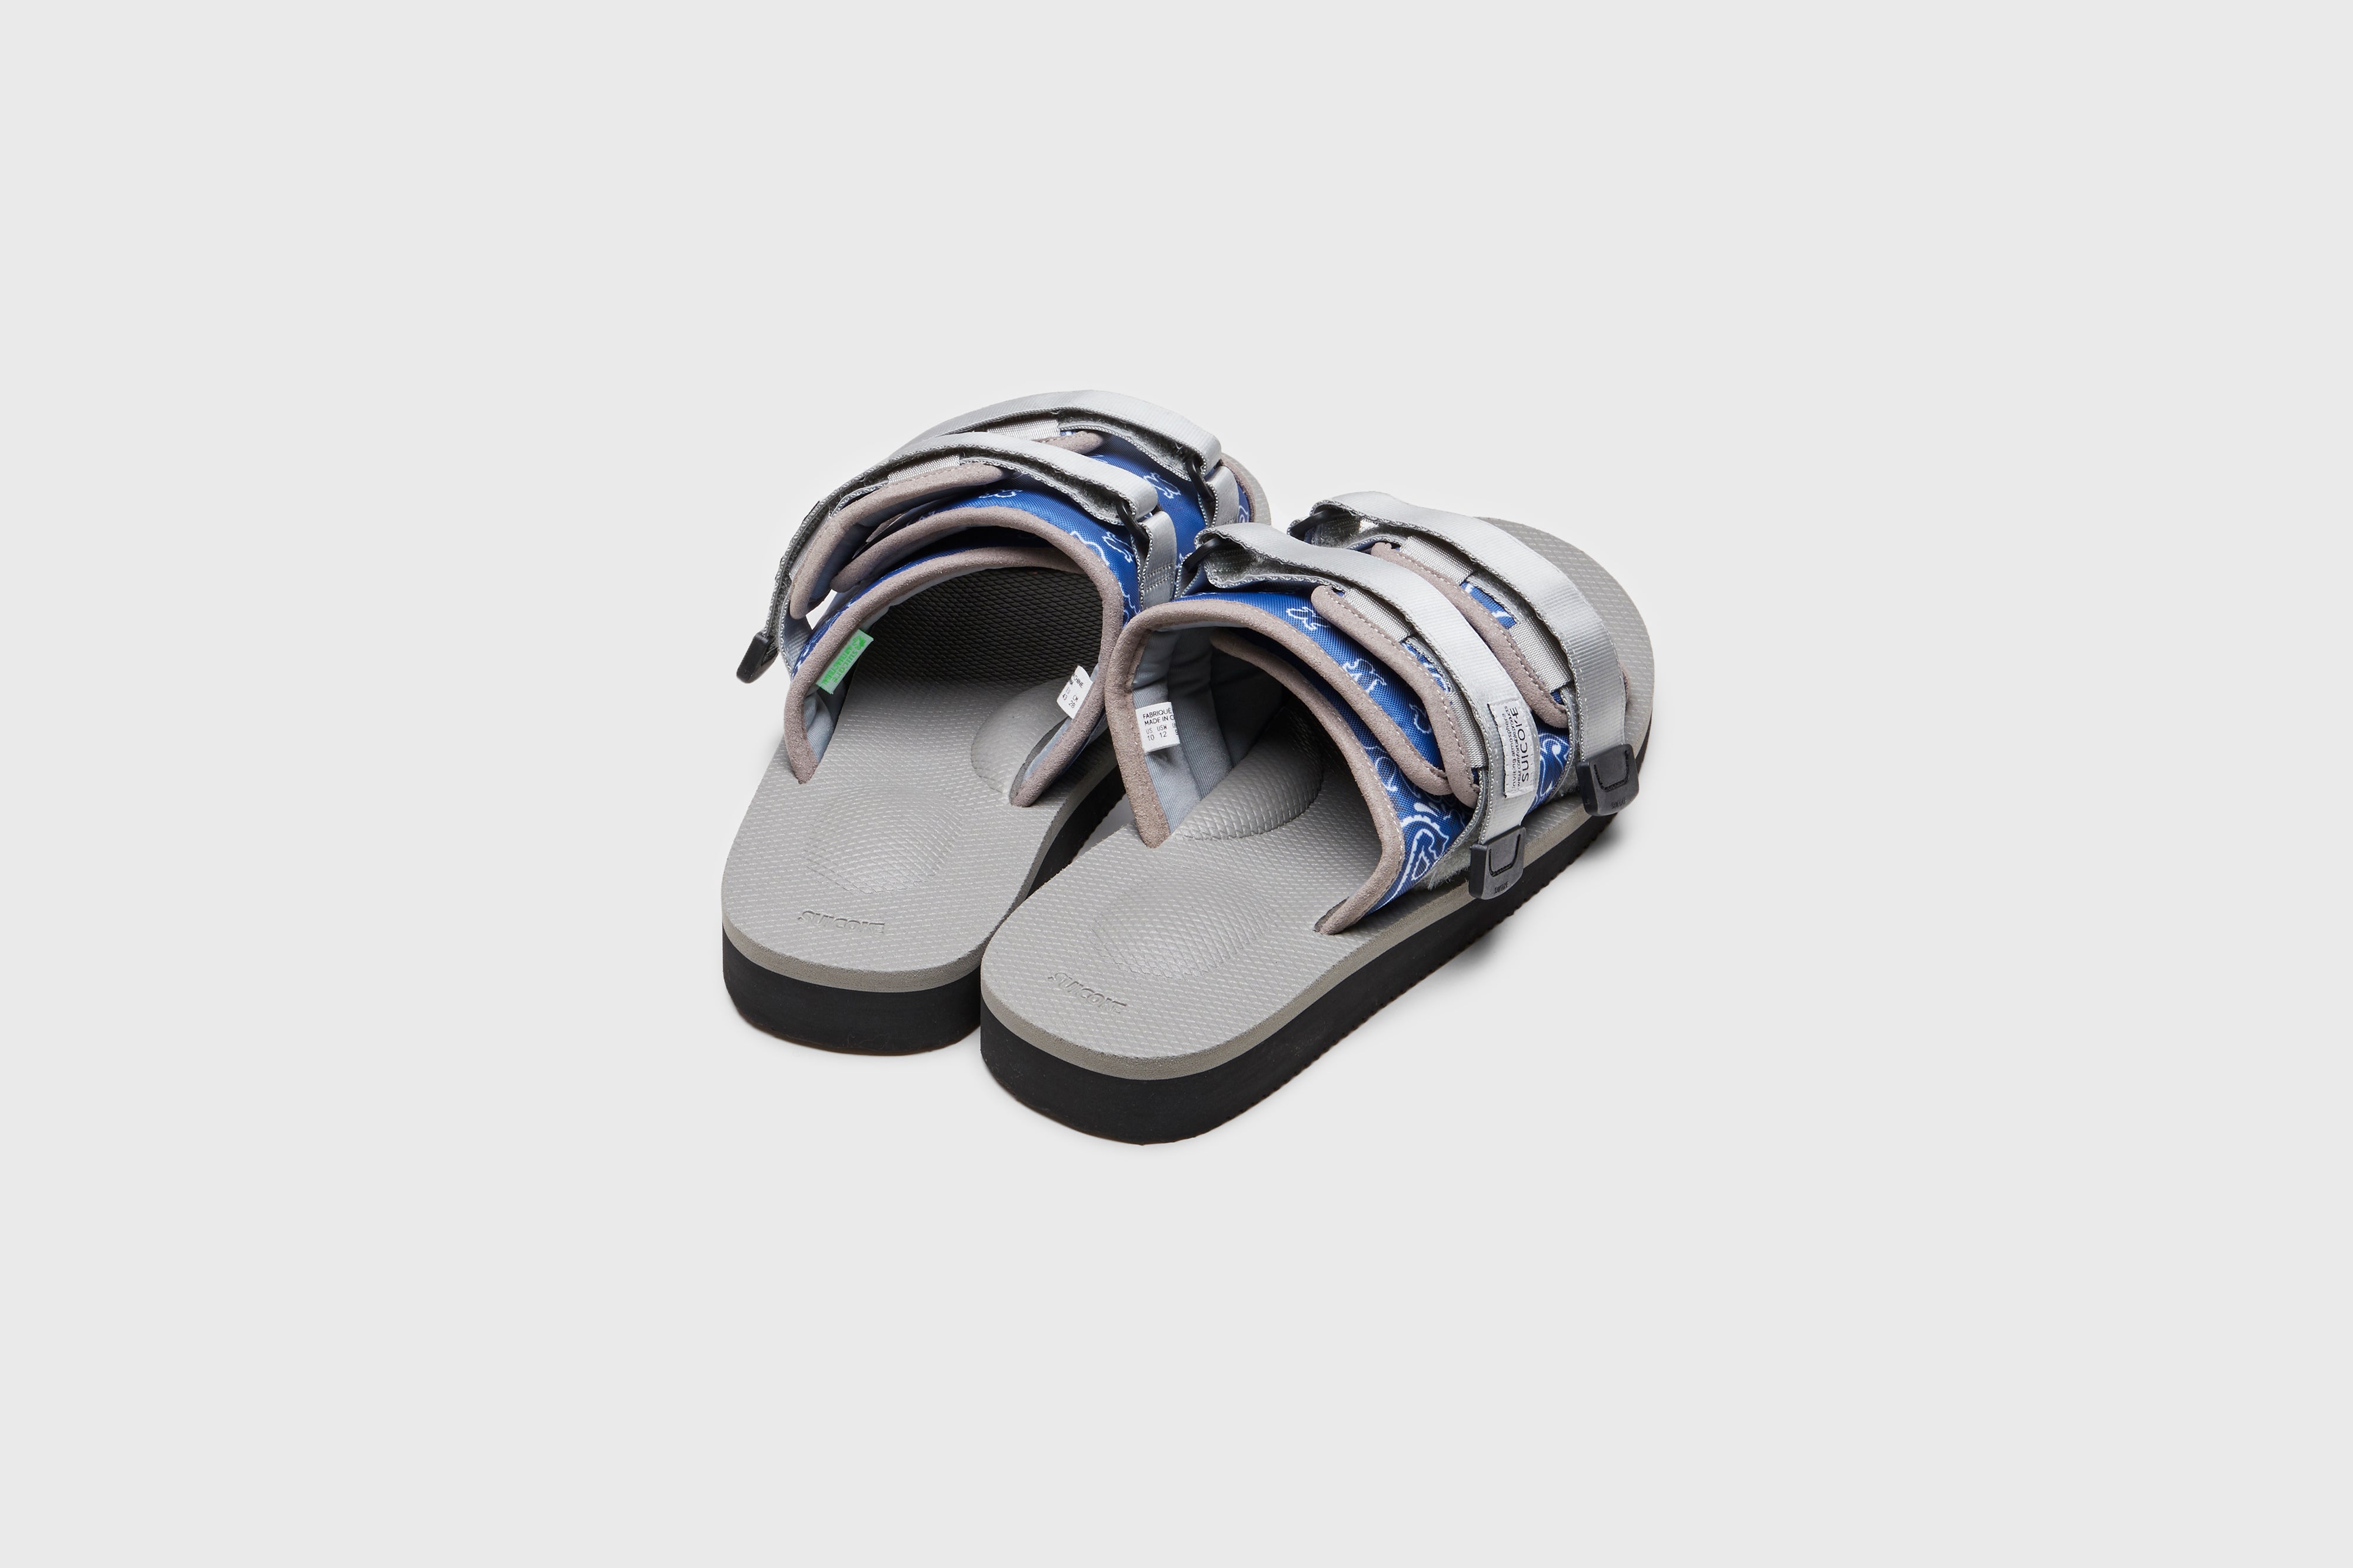 SUICOKE MOTO-Cab-PT05 slides with navy &amp; gray nylon upper, navy &amp; gray midsole and sole, strap and logo patch. From Spring/Summer 2023 collection on eightywingold Web Store, an official partner of SUICOKE. OG-056CAB-PT05 NAVY X GRAY